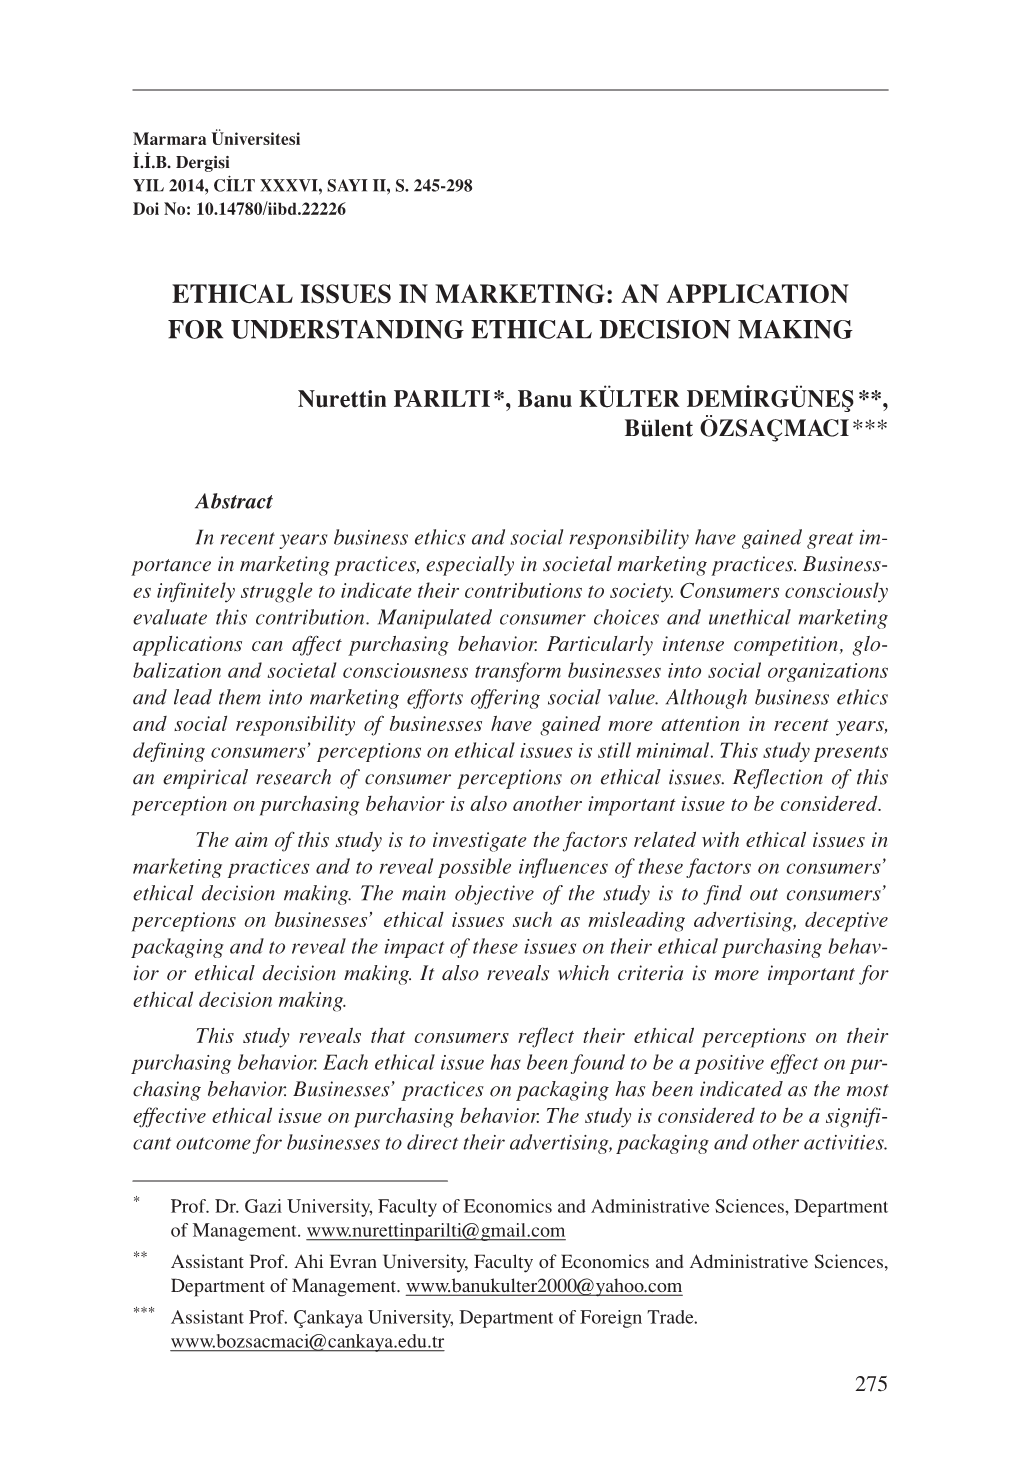 Ethical Issues in Marketing: an Application for Understanding Ethical Decision Making